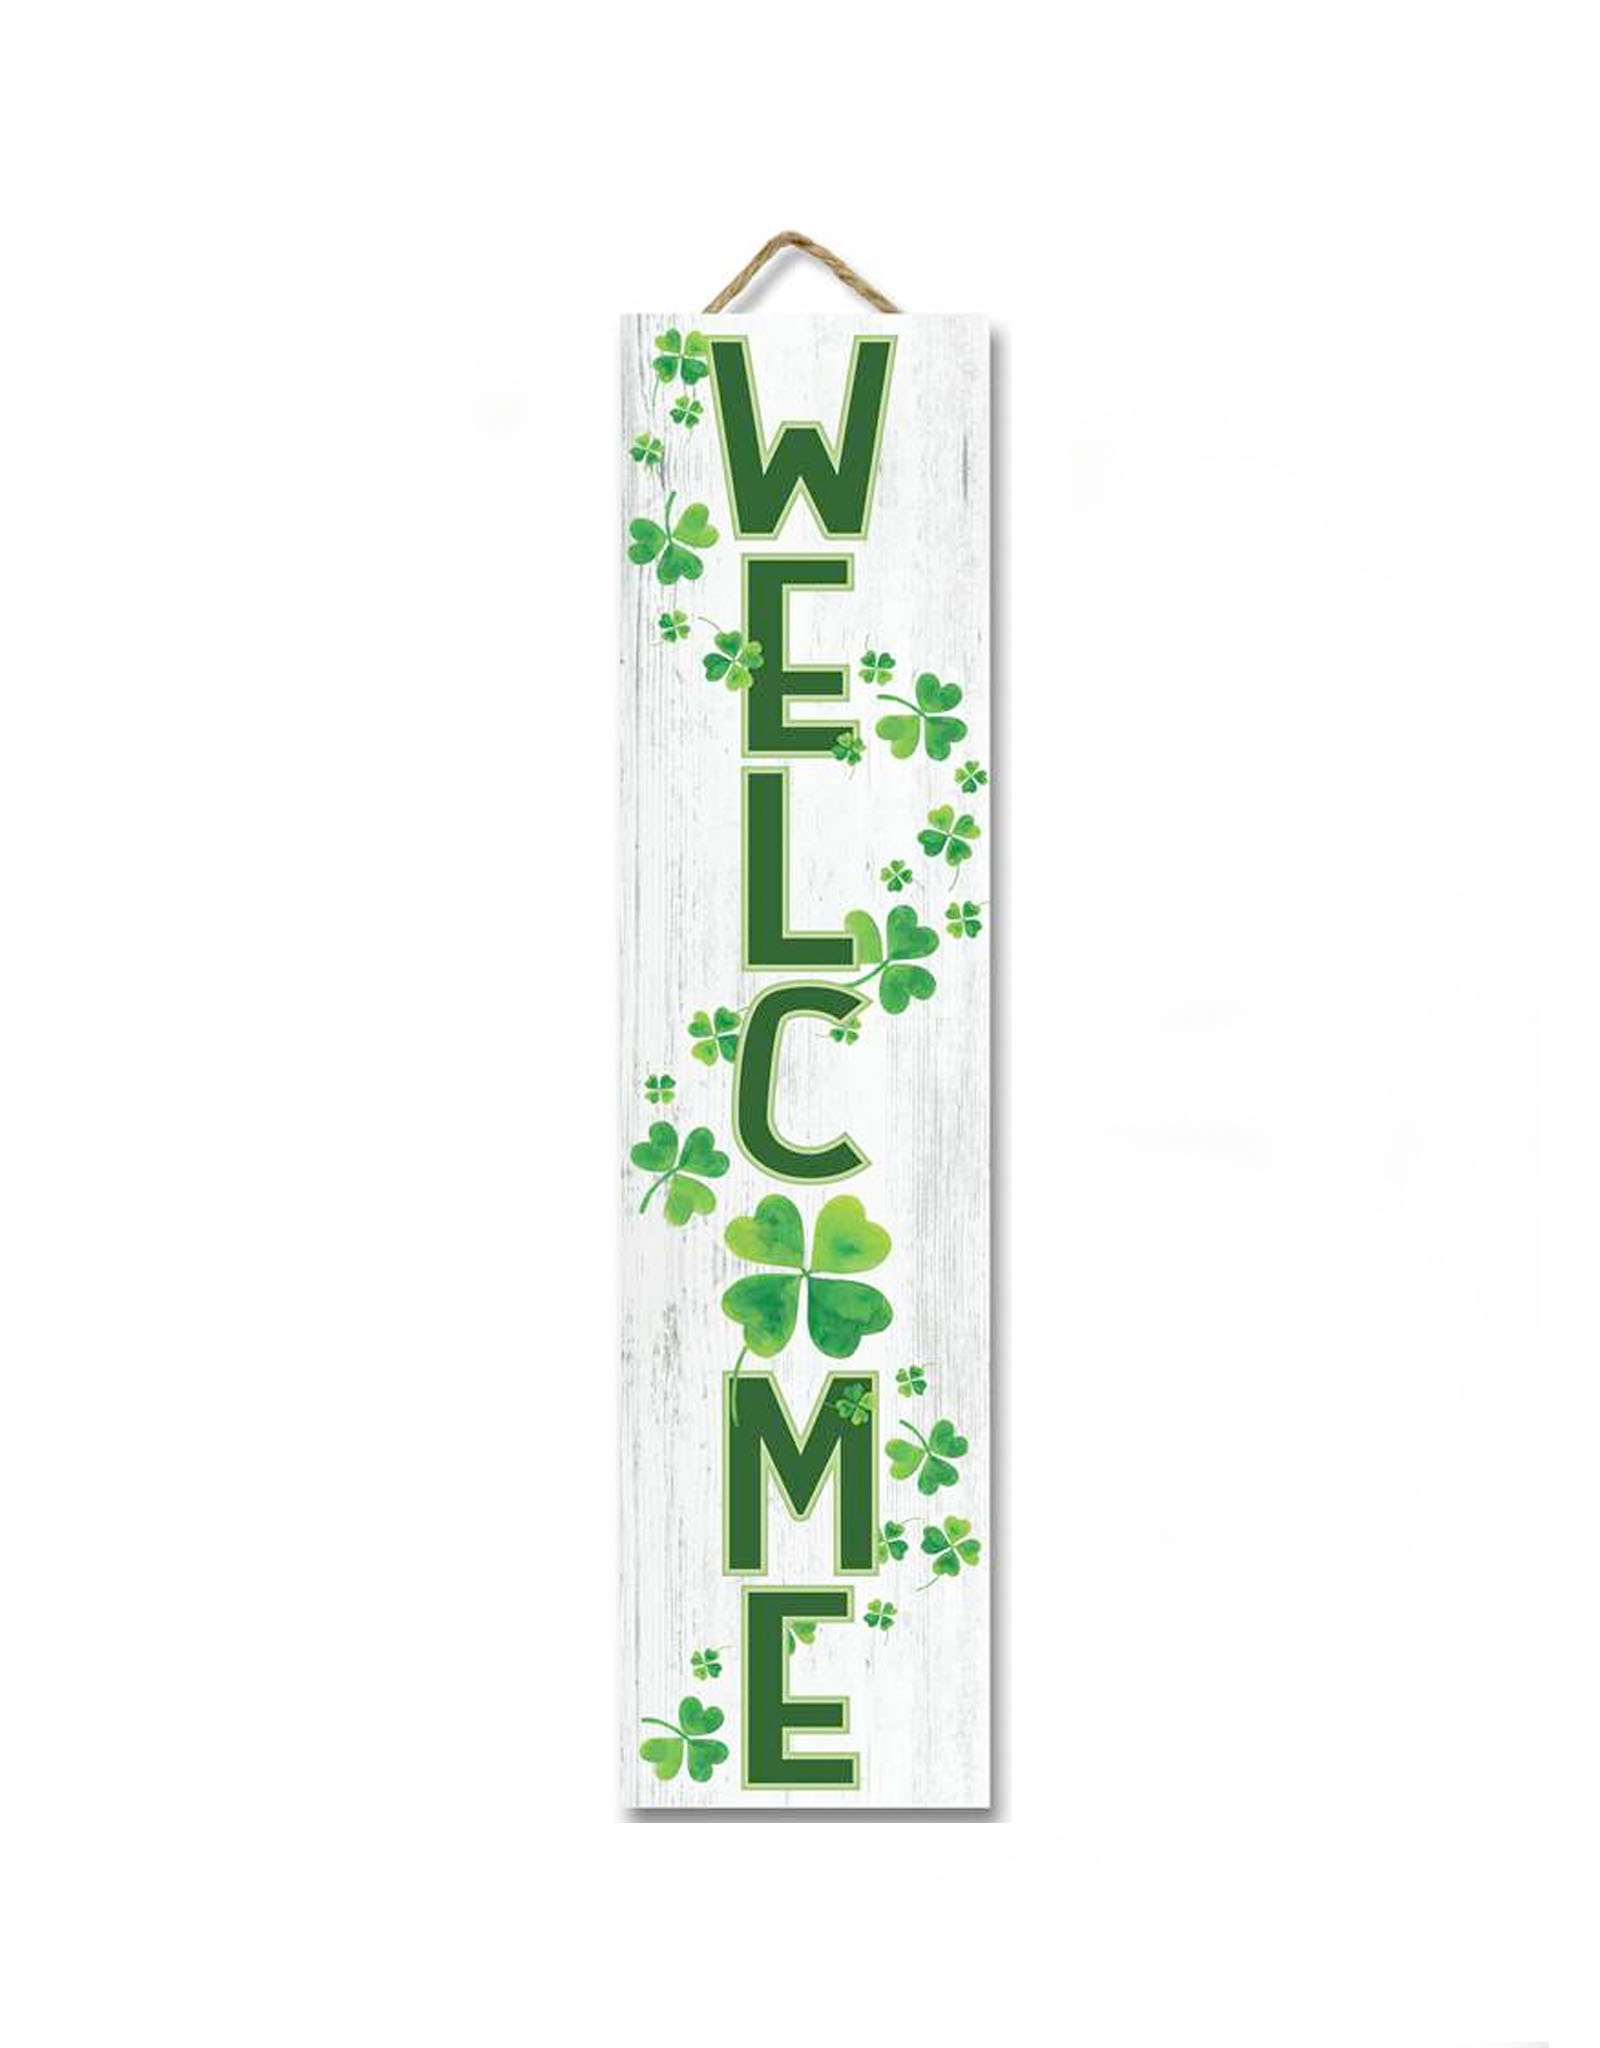 PLAQUES, SIGNS & POSTERS VERTICAL WELCOME SIGN w SHAMROCKS